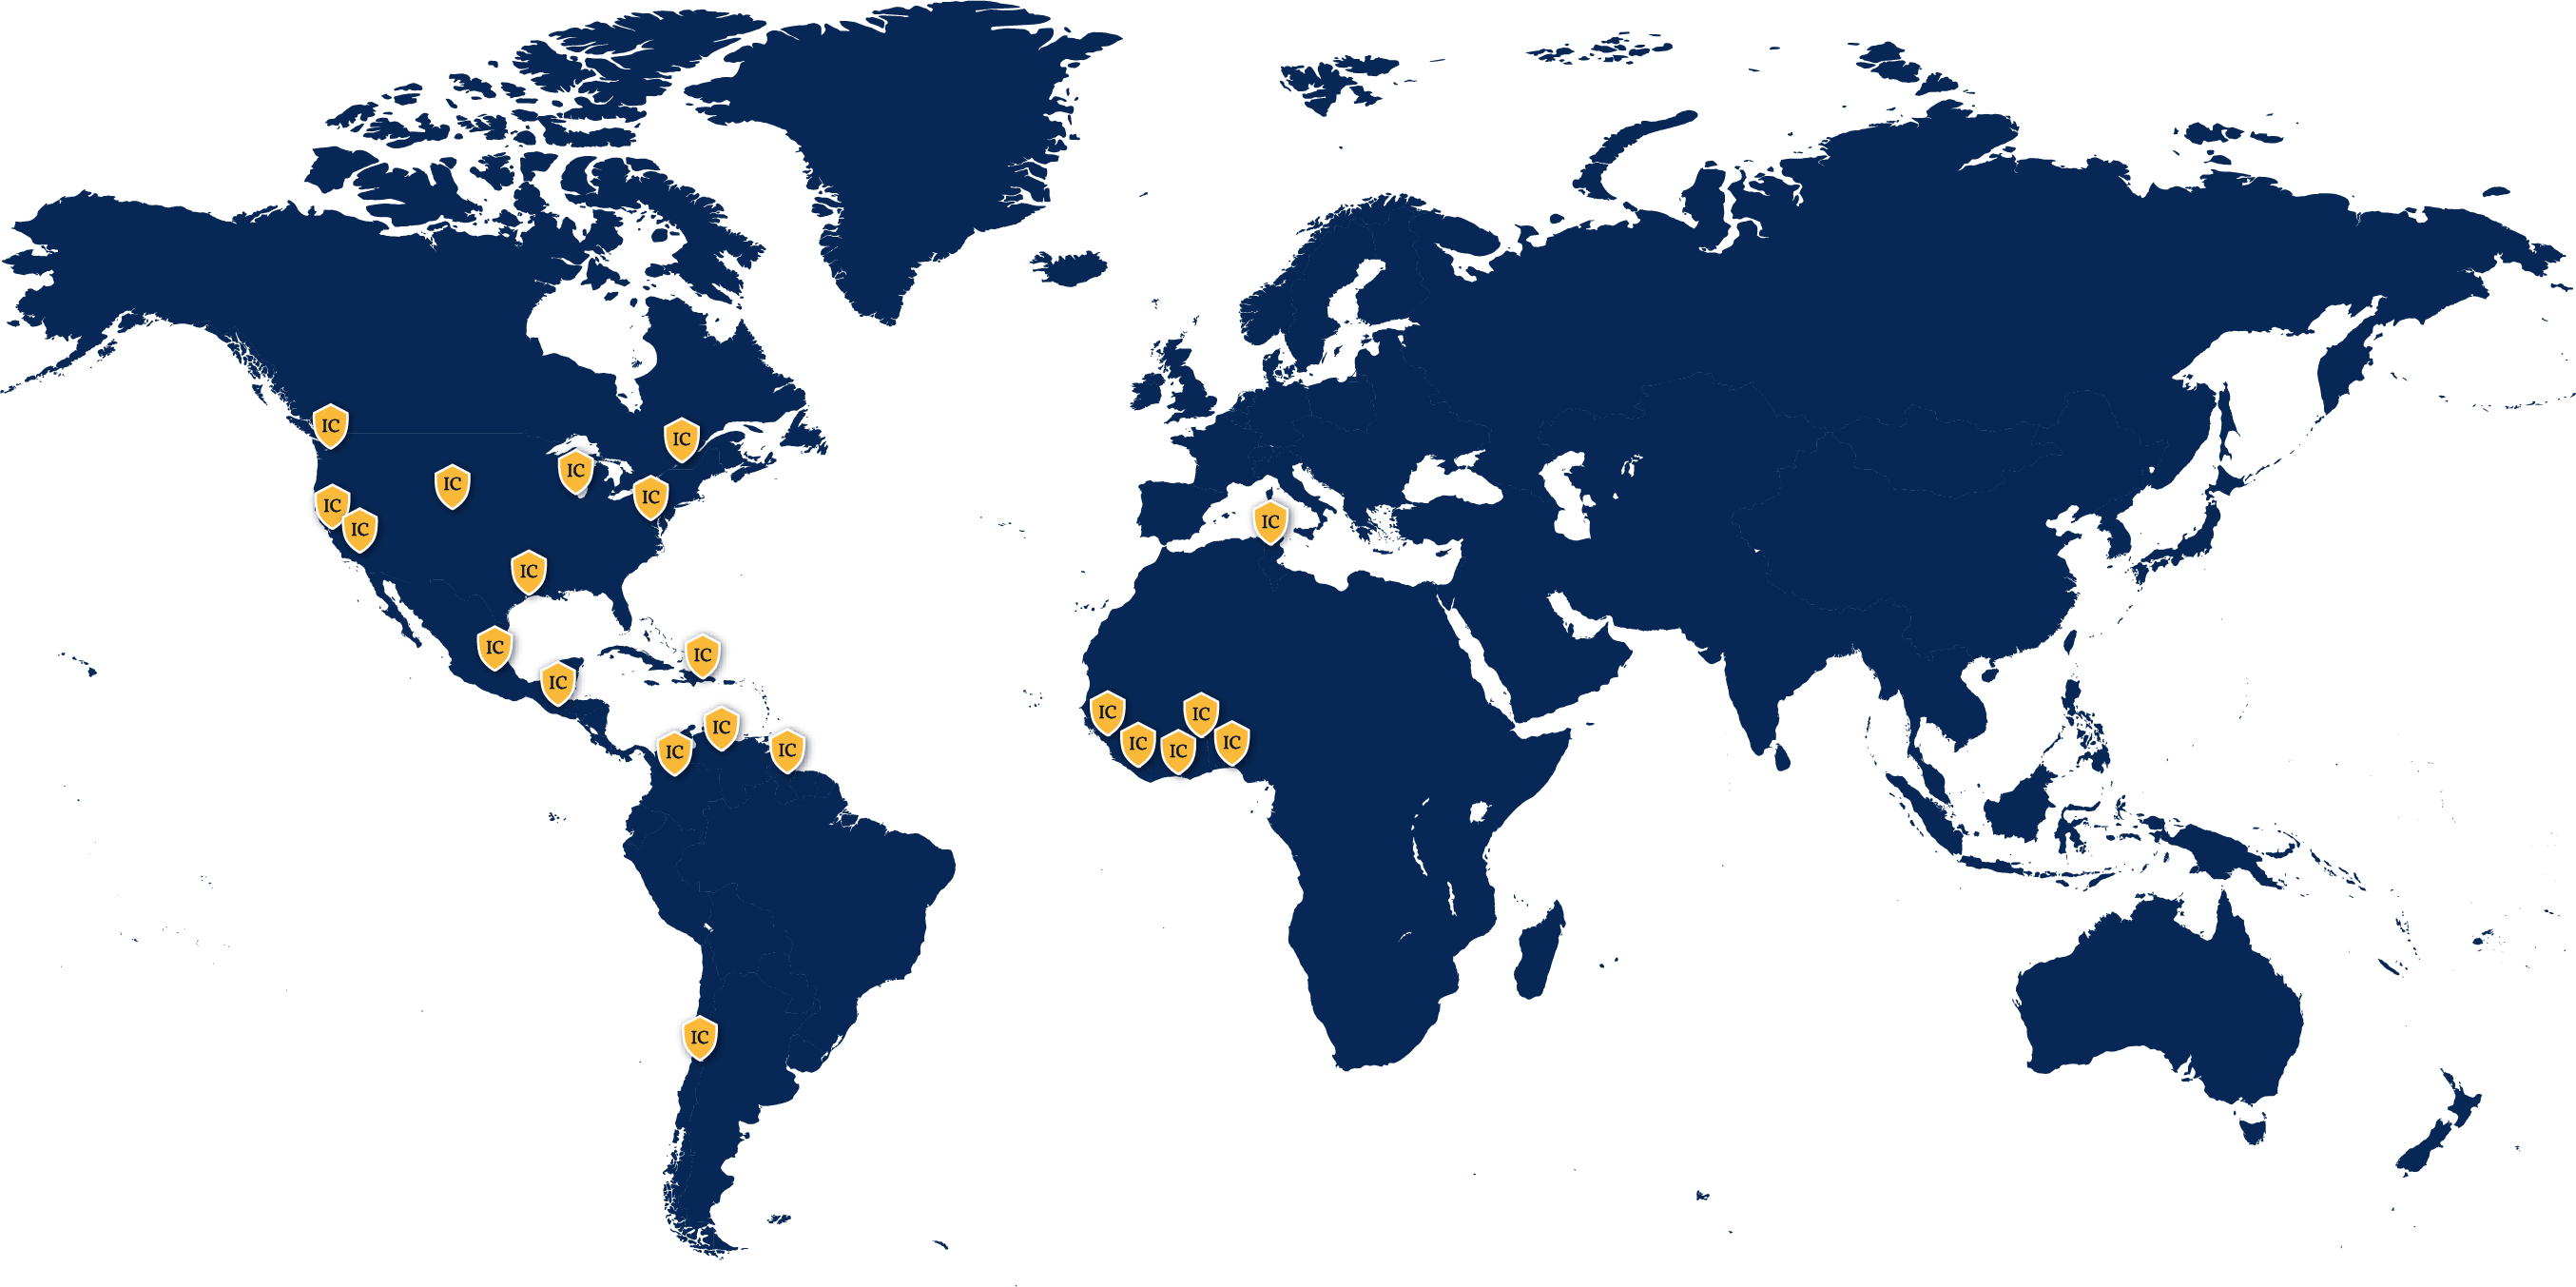 World map with labeled Inter-Con Headquarters